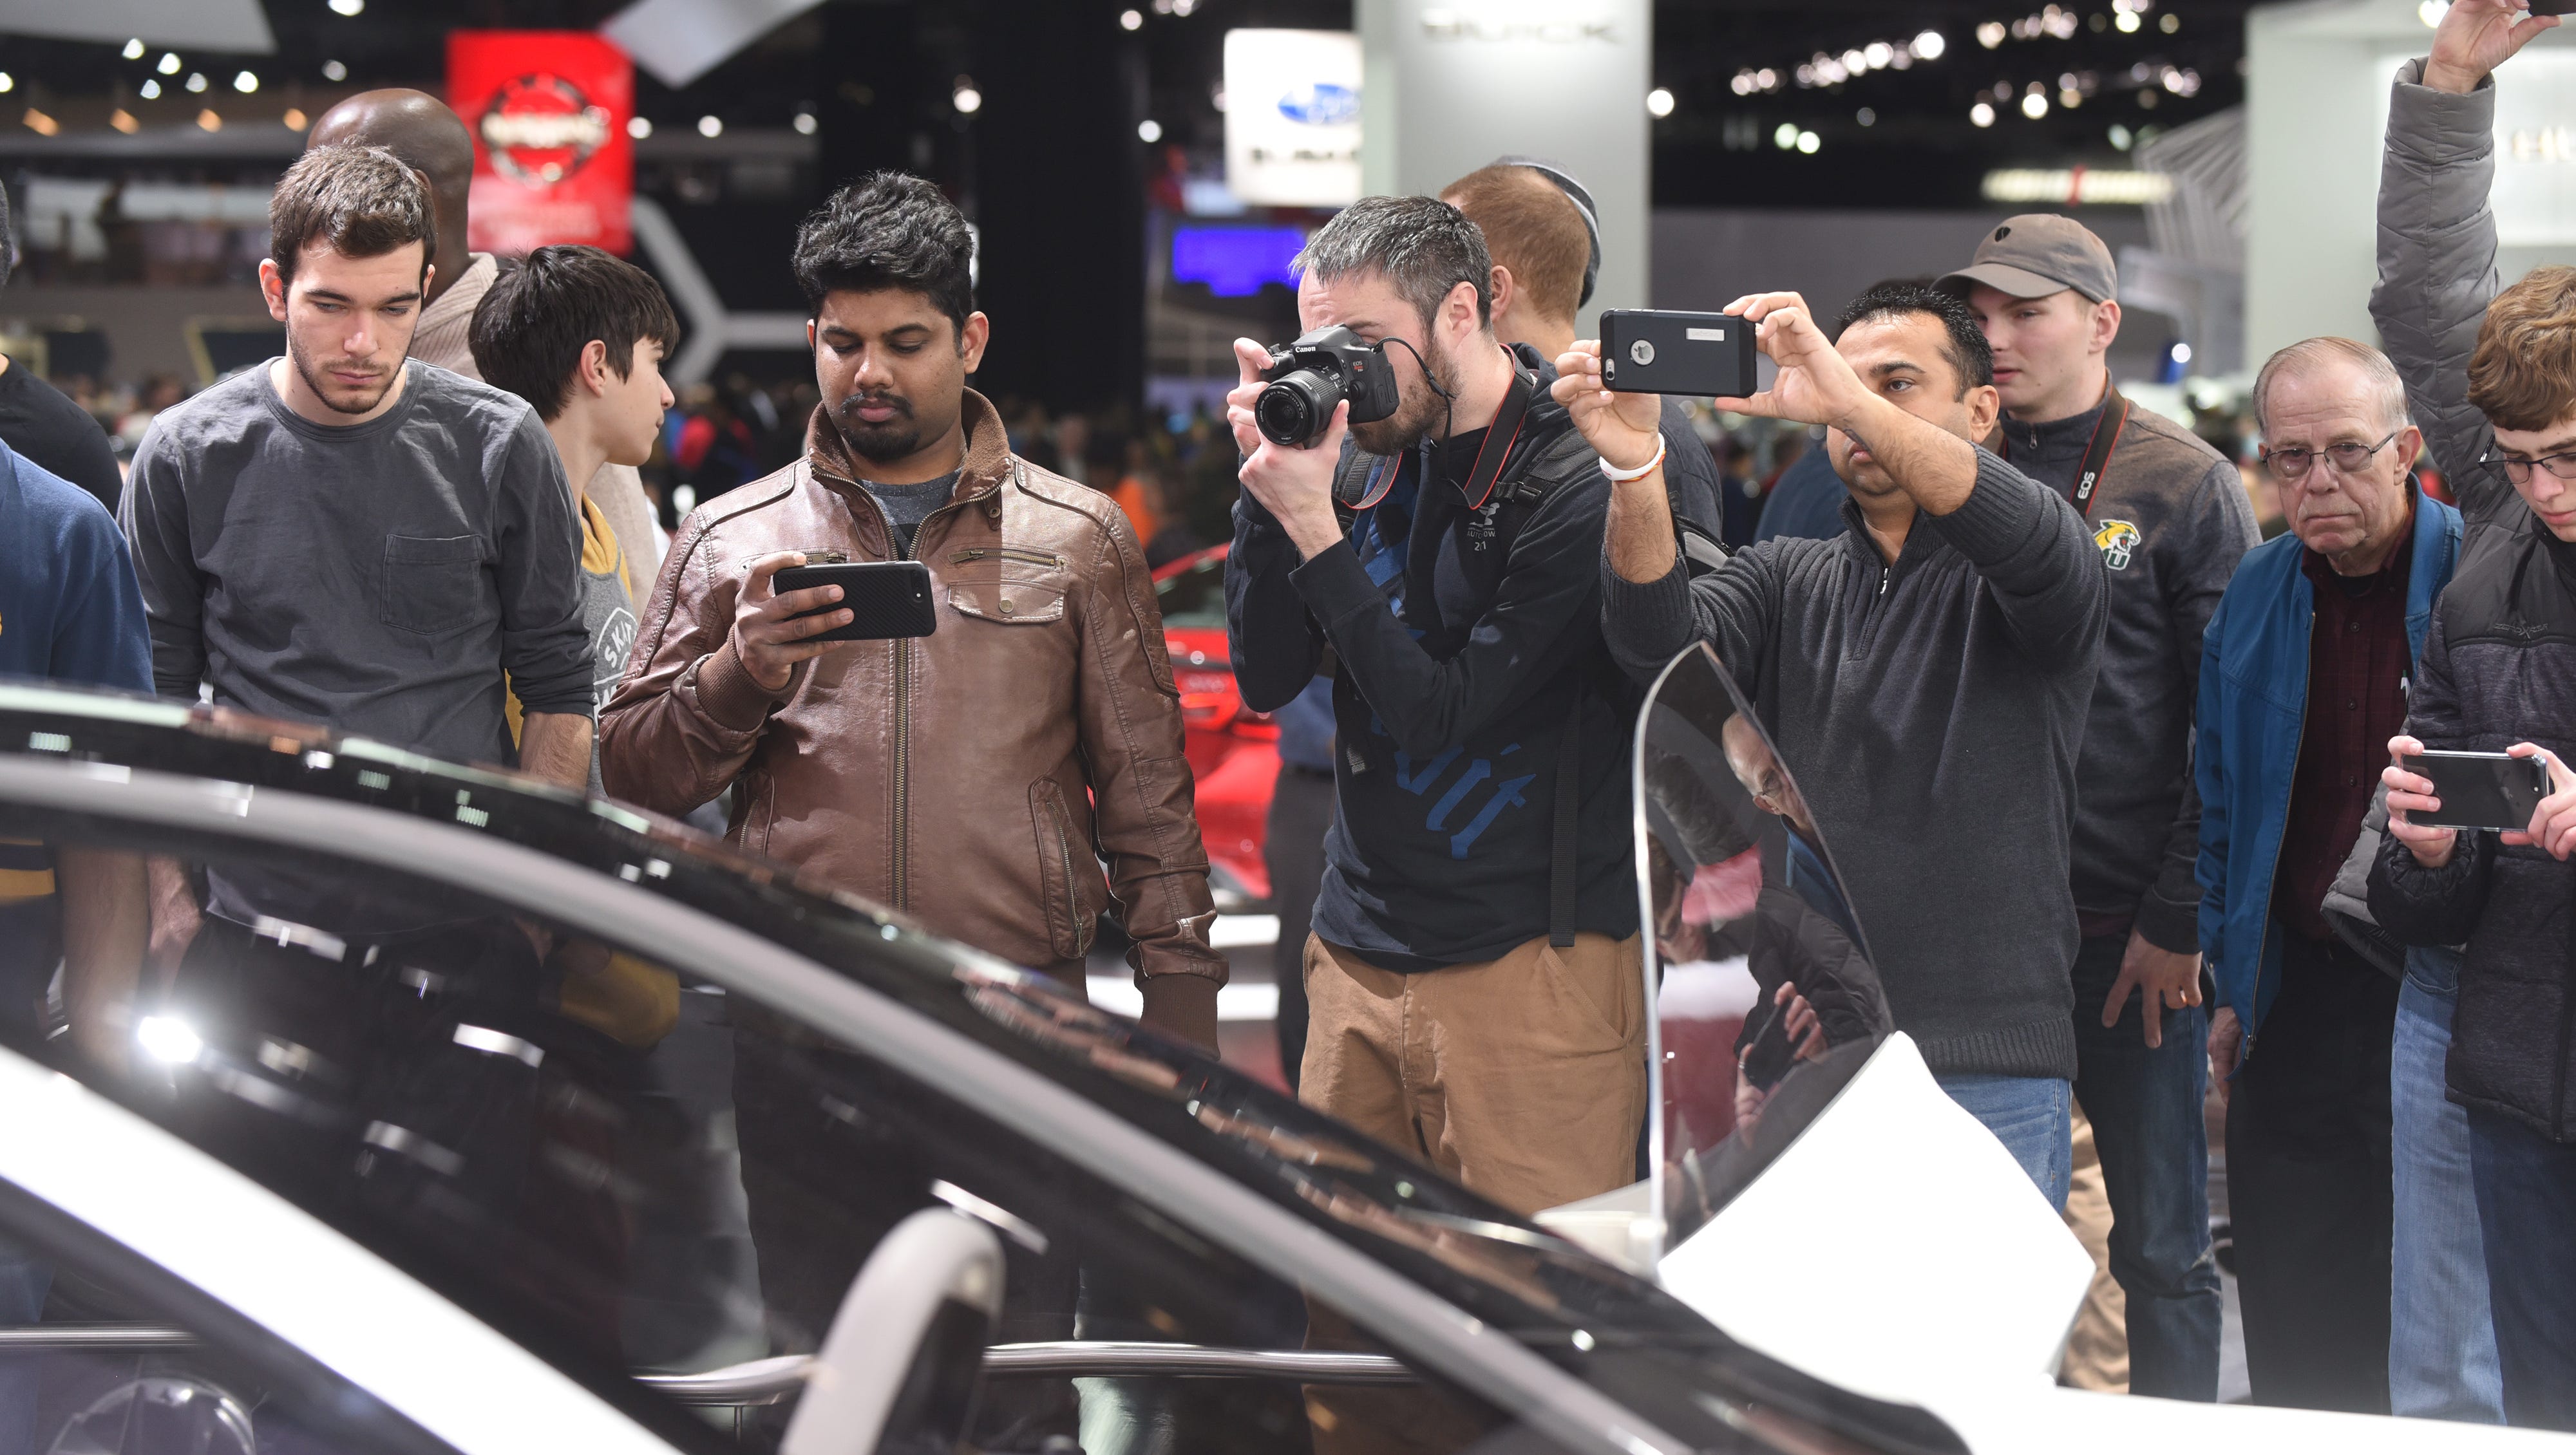 People photograph the Infiniti Q Inspiration Concept on Saturday January 20, 2018 for the first public day for the North American International Auto Show